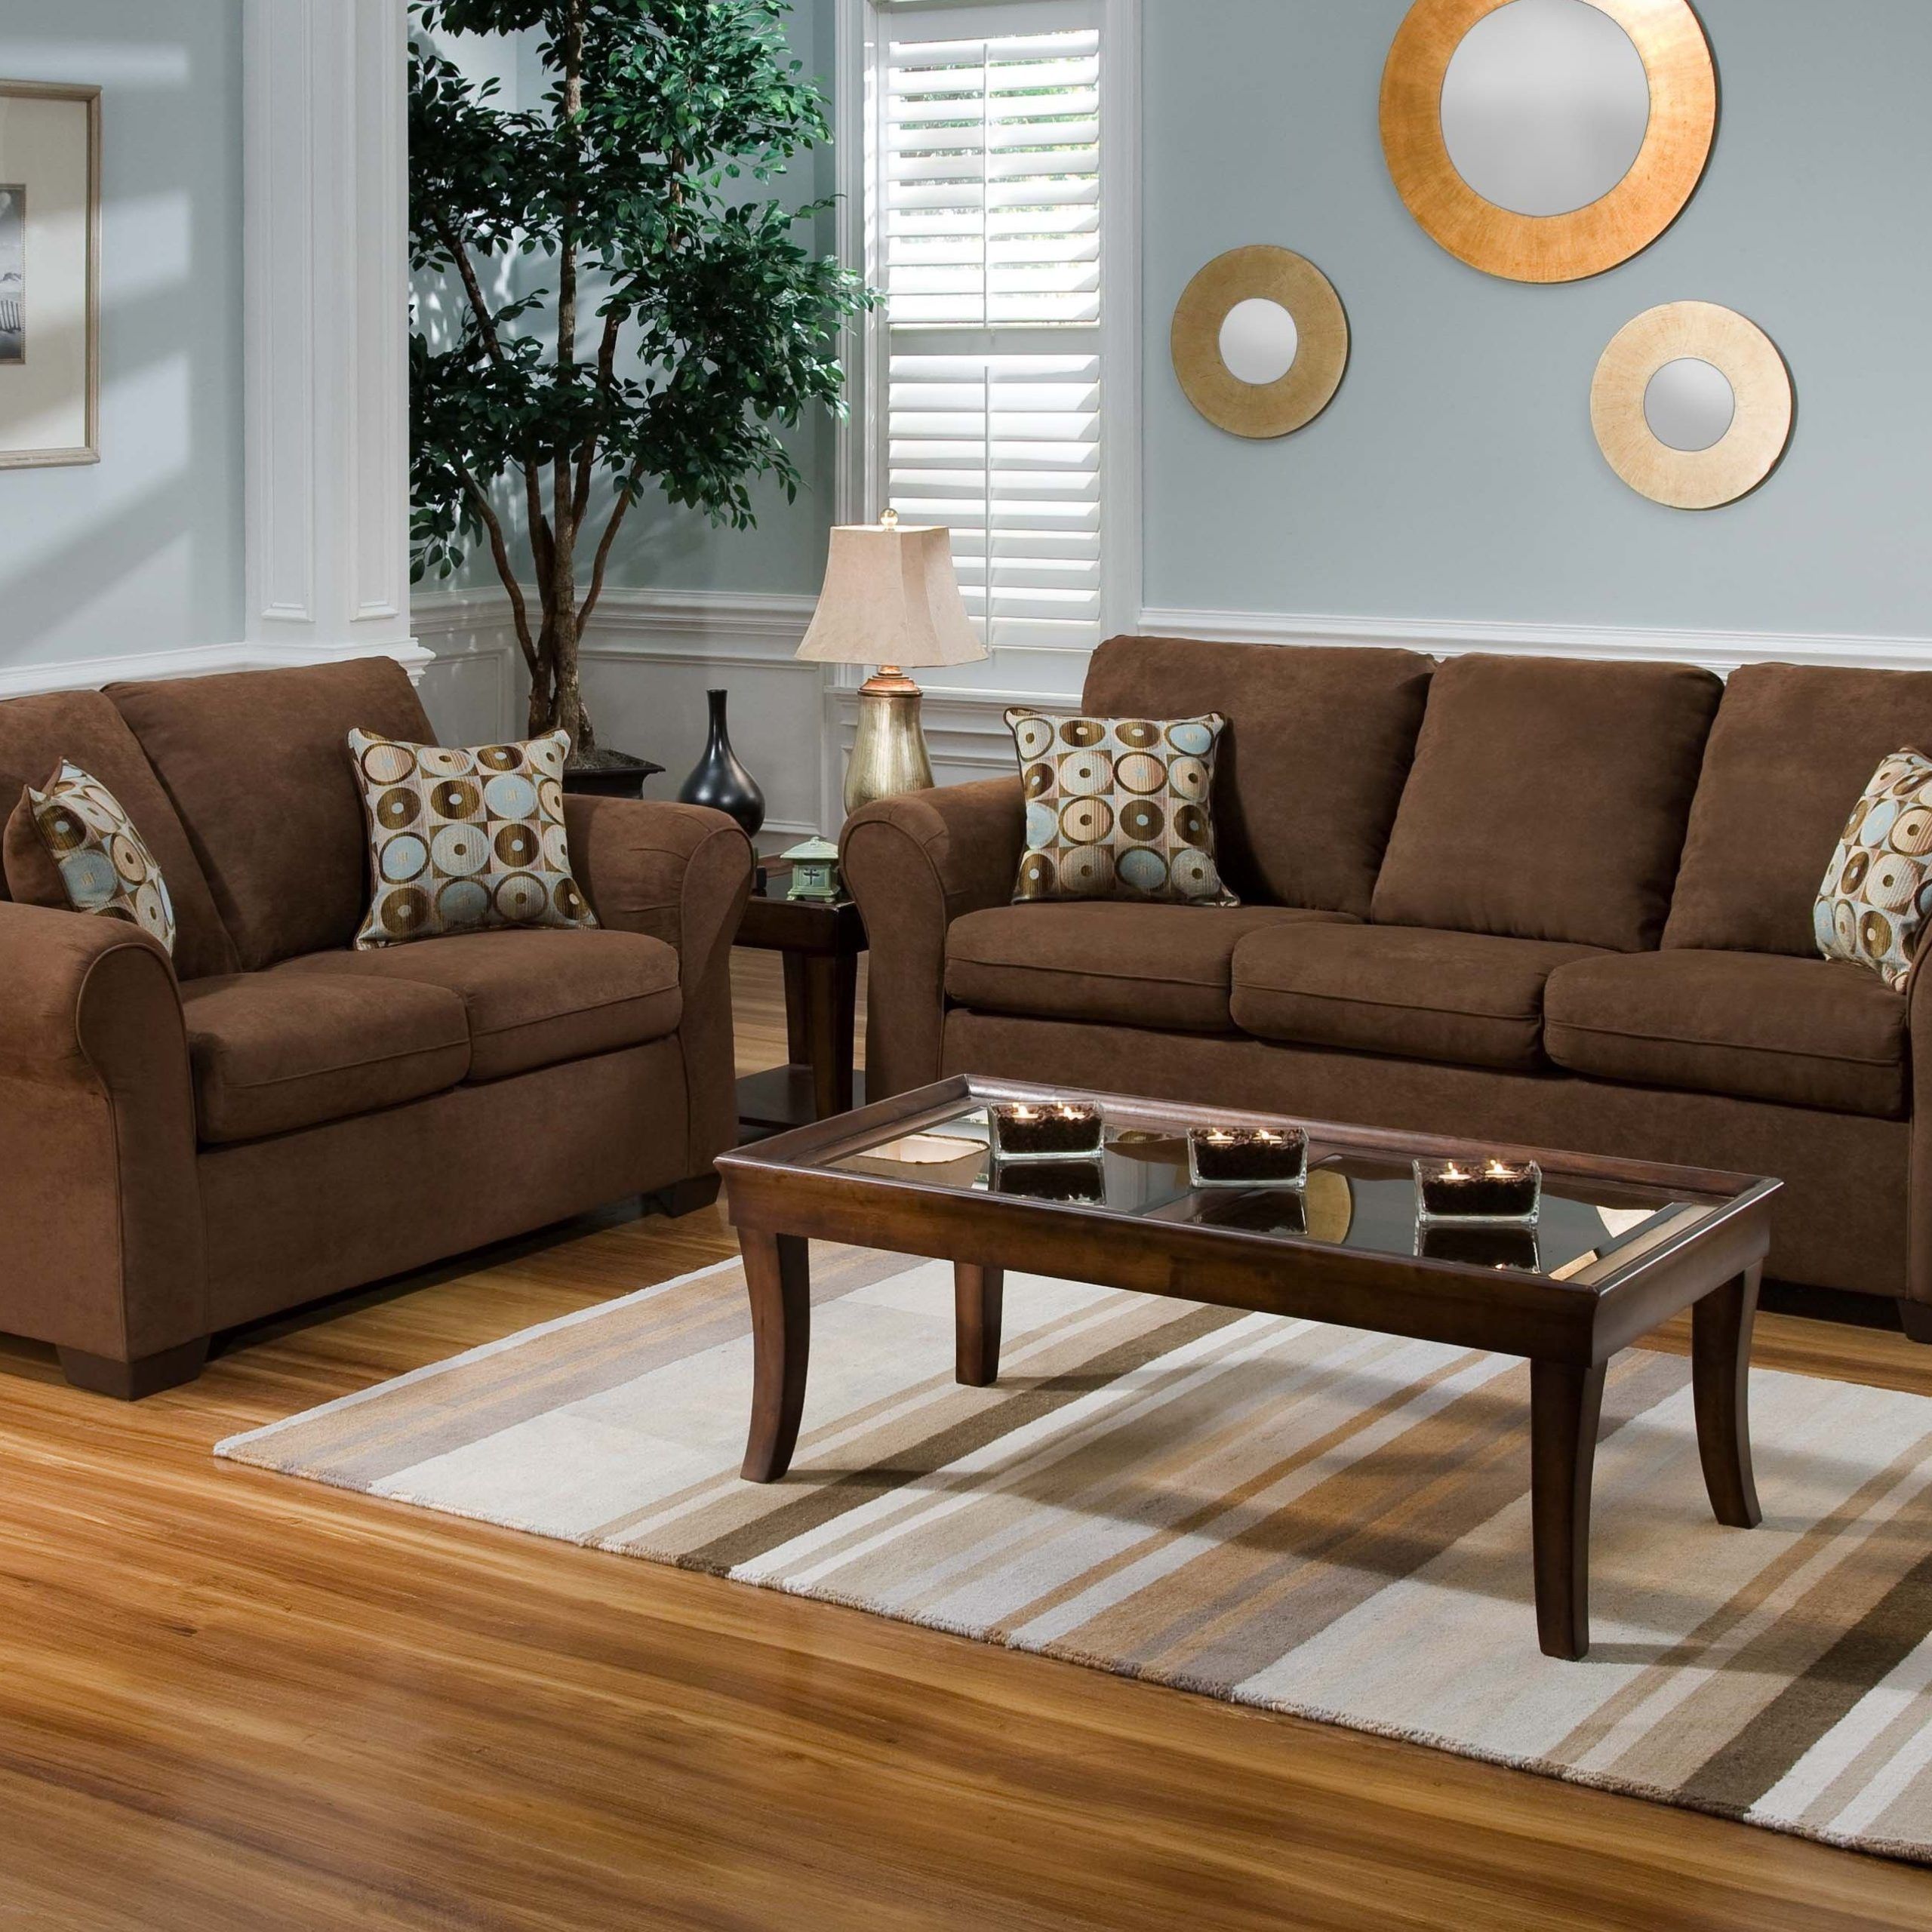 Preferred Sofas In Chocolate Brown With Regard To Wood Flooring Color To Complement Brown Leather And Oak Furniture (View 8 of 15)